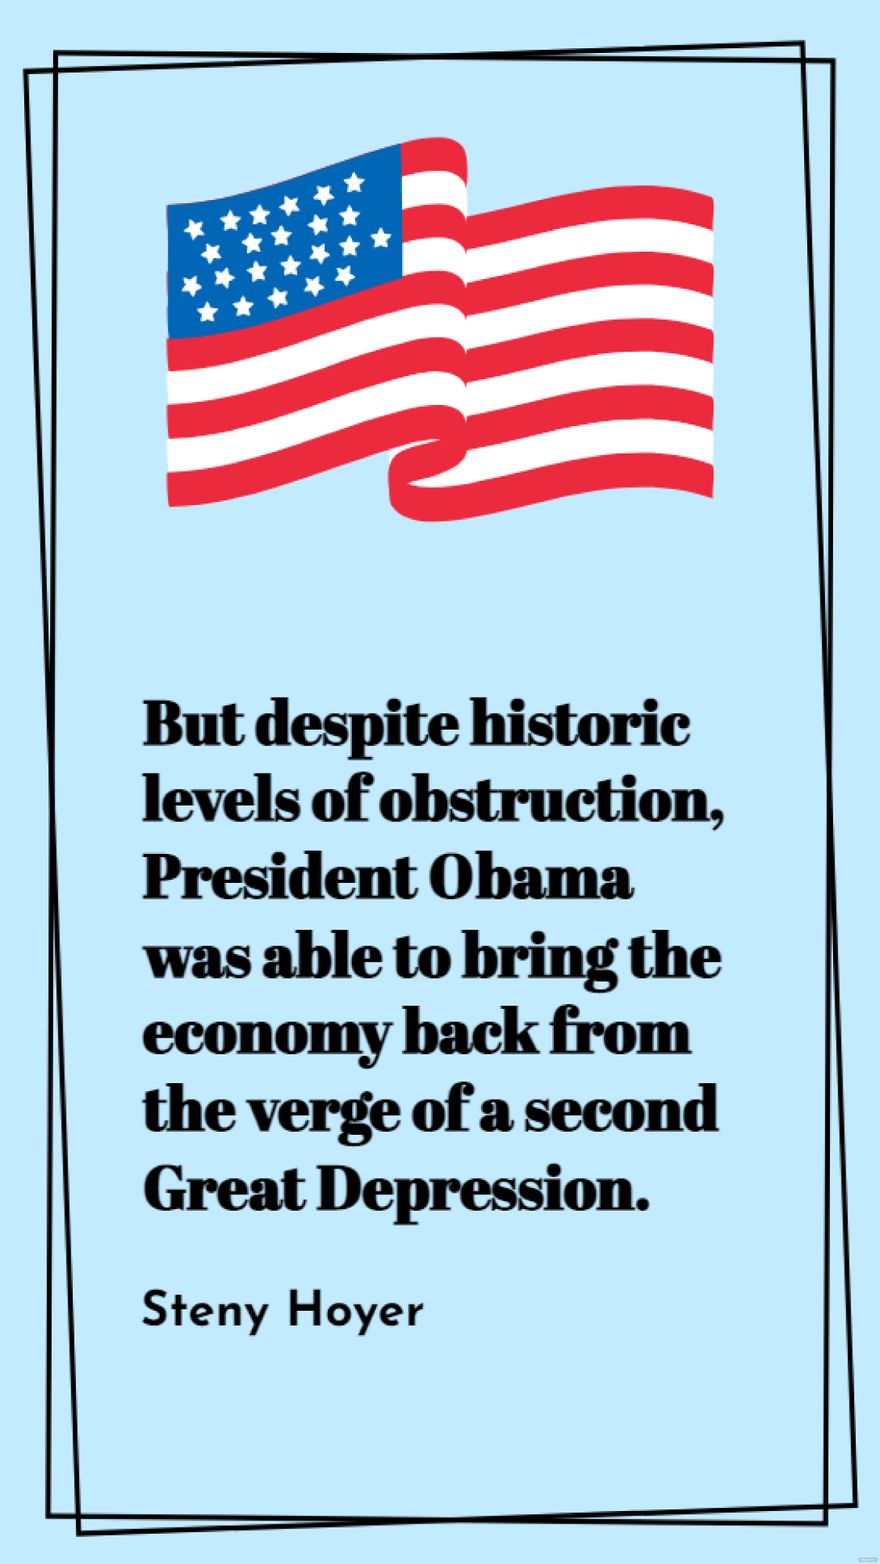 Steny Hoyer - But despite historic levels of obstruction, President Obama was able to bring the economy back from the verge of a second Great Depression.